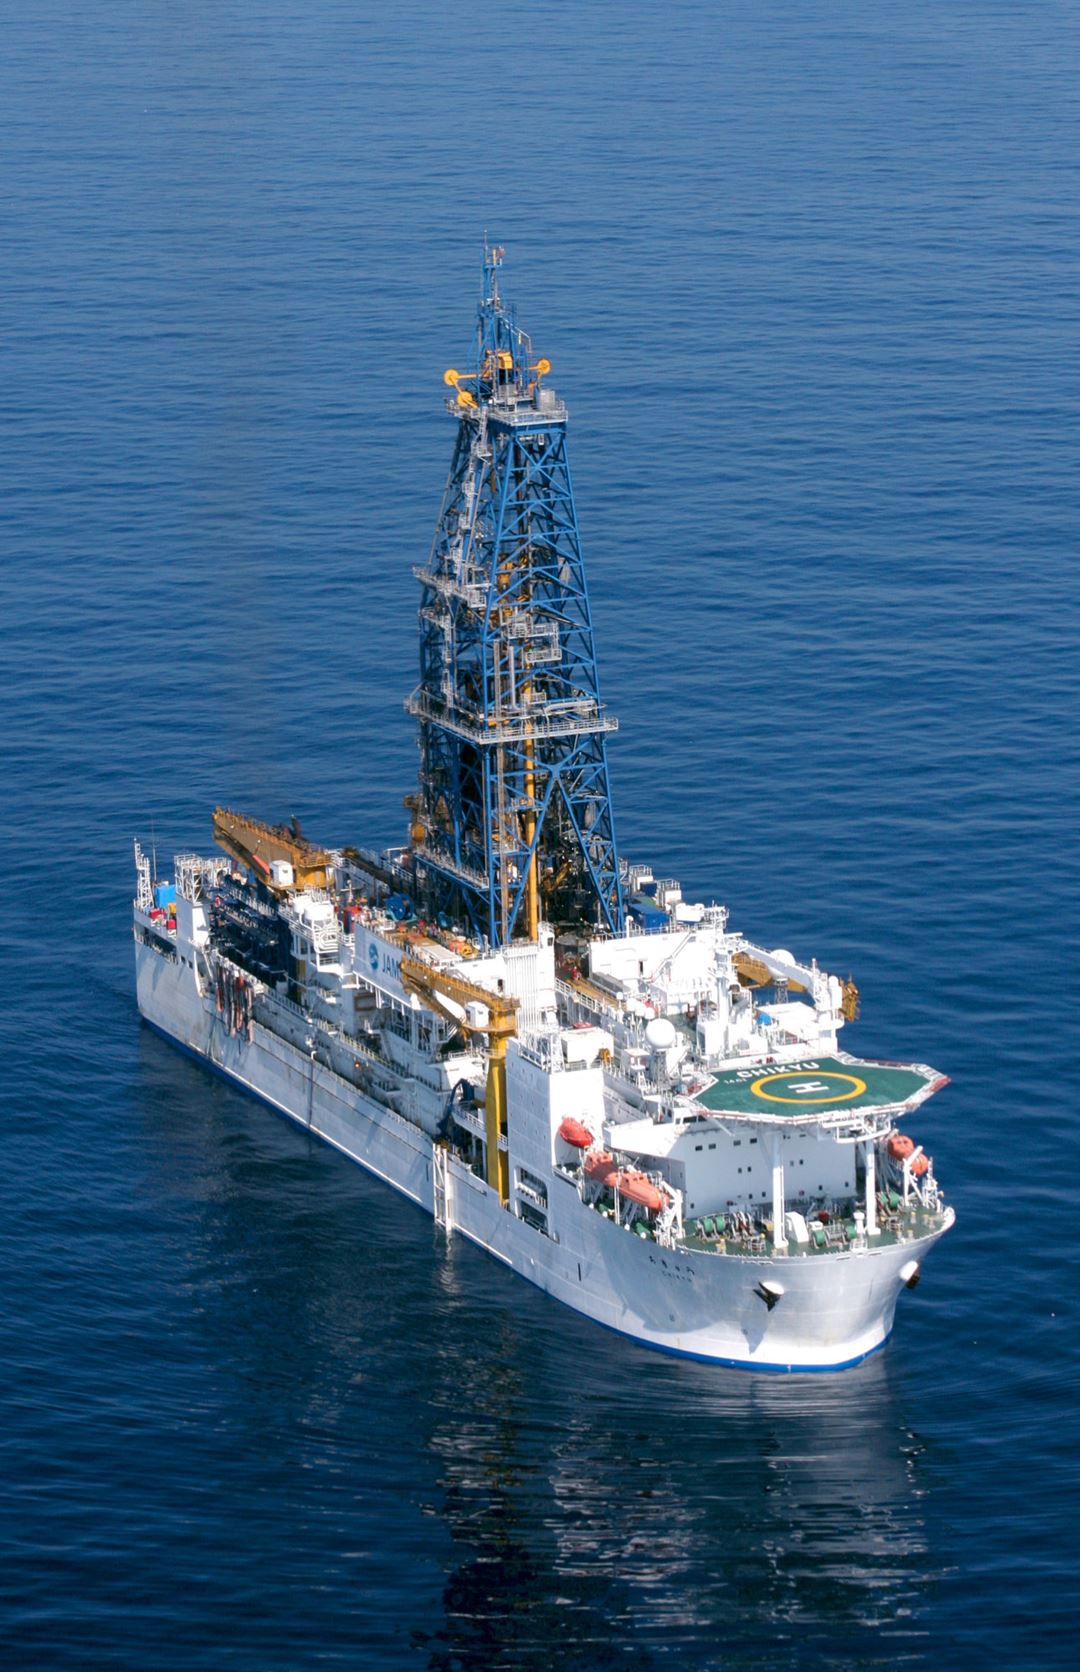 JAMSTEC's Chikyu research vessel is the largest of its kind in the world, and has helped Japanese scientists unlock secrets that lie deep in the ocean. Photo: JAMSTEC